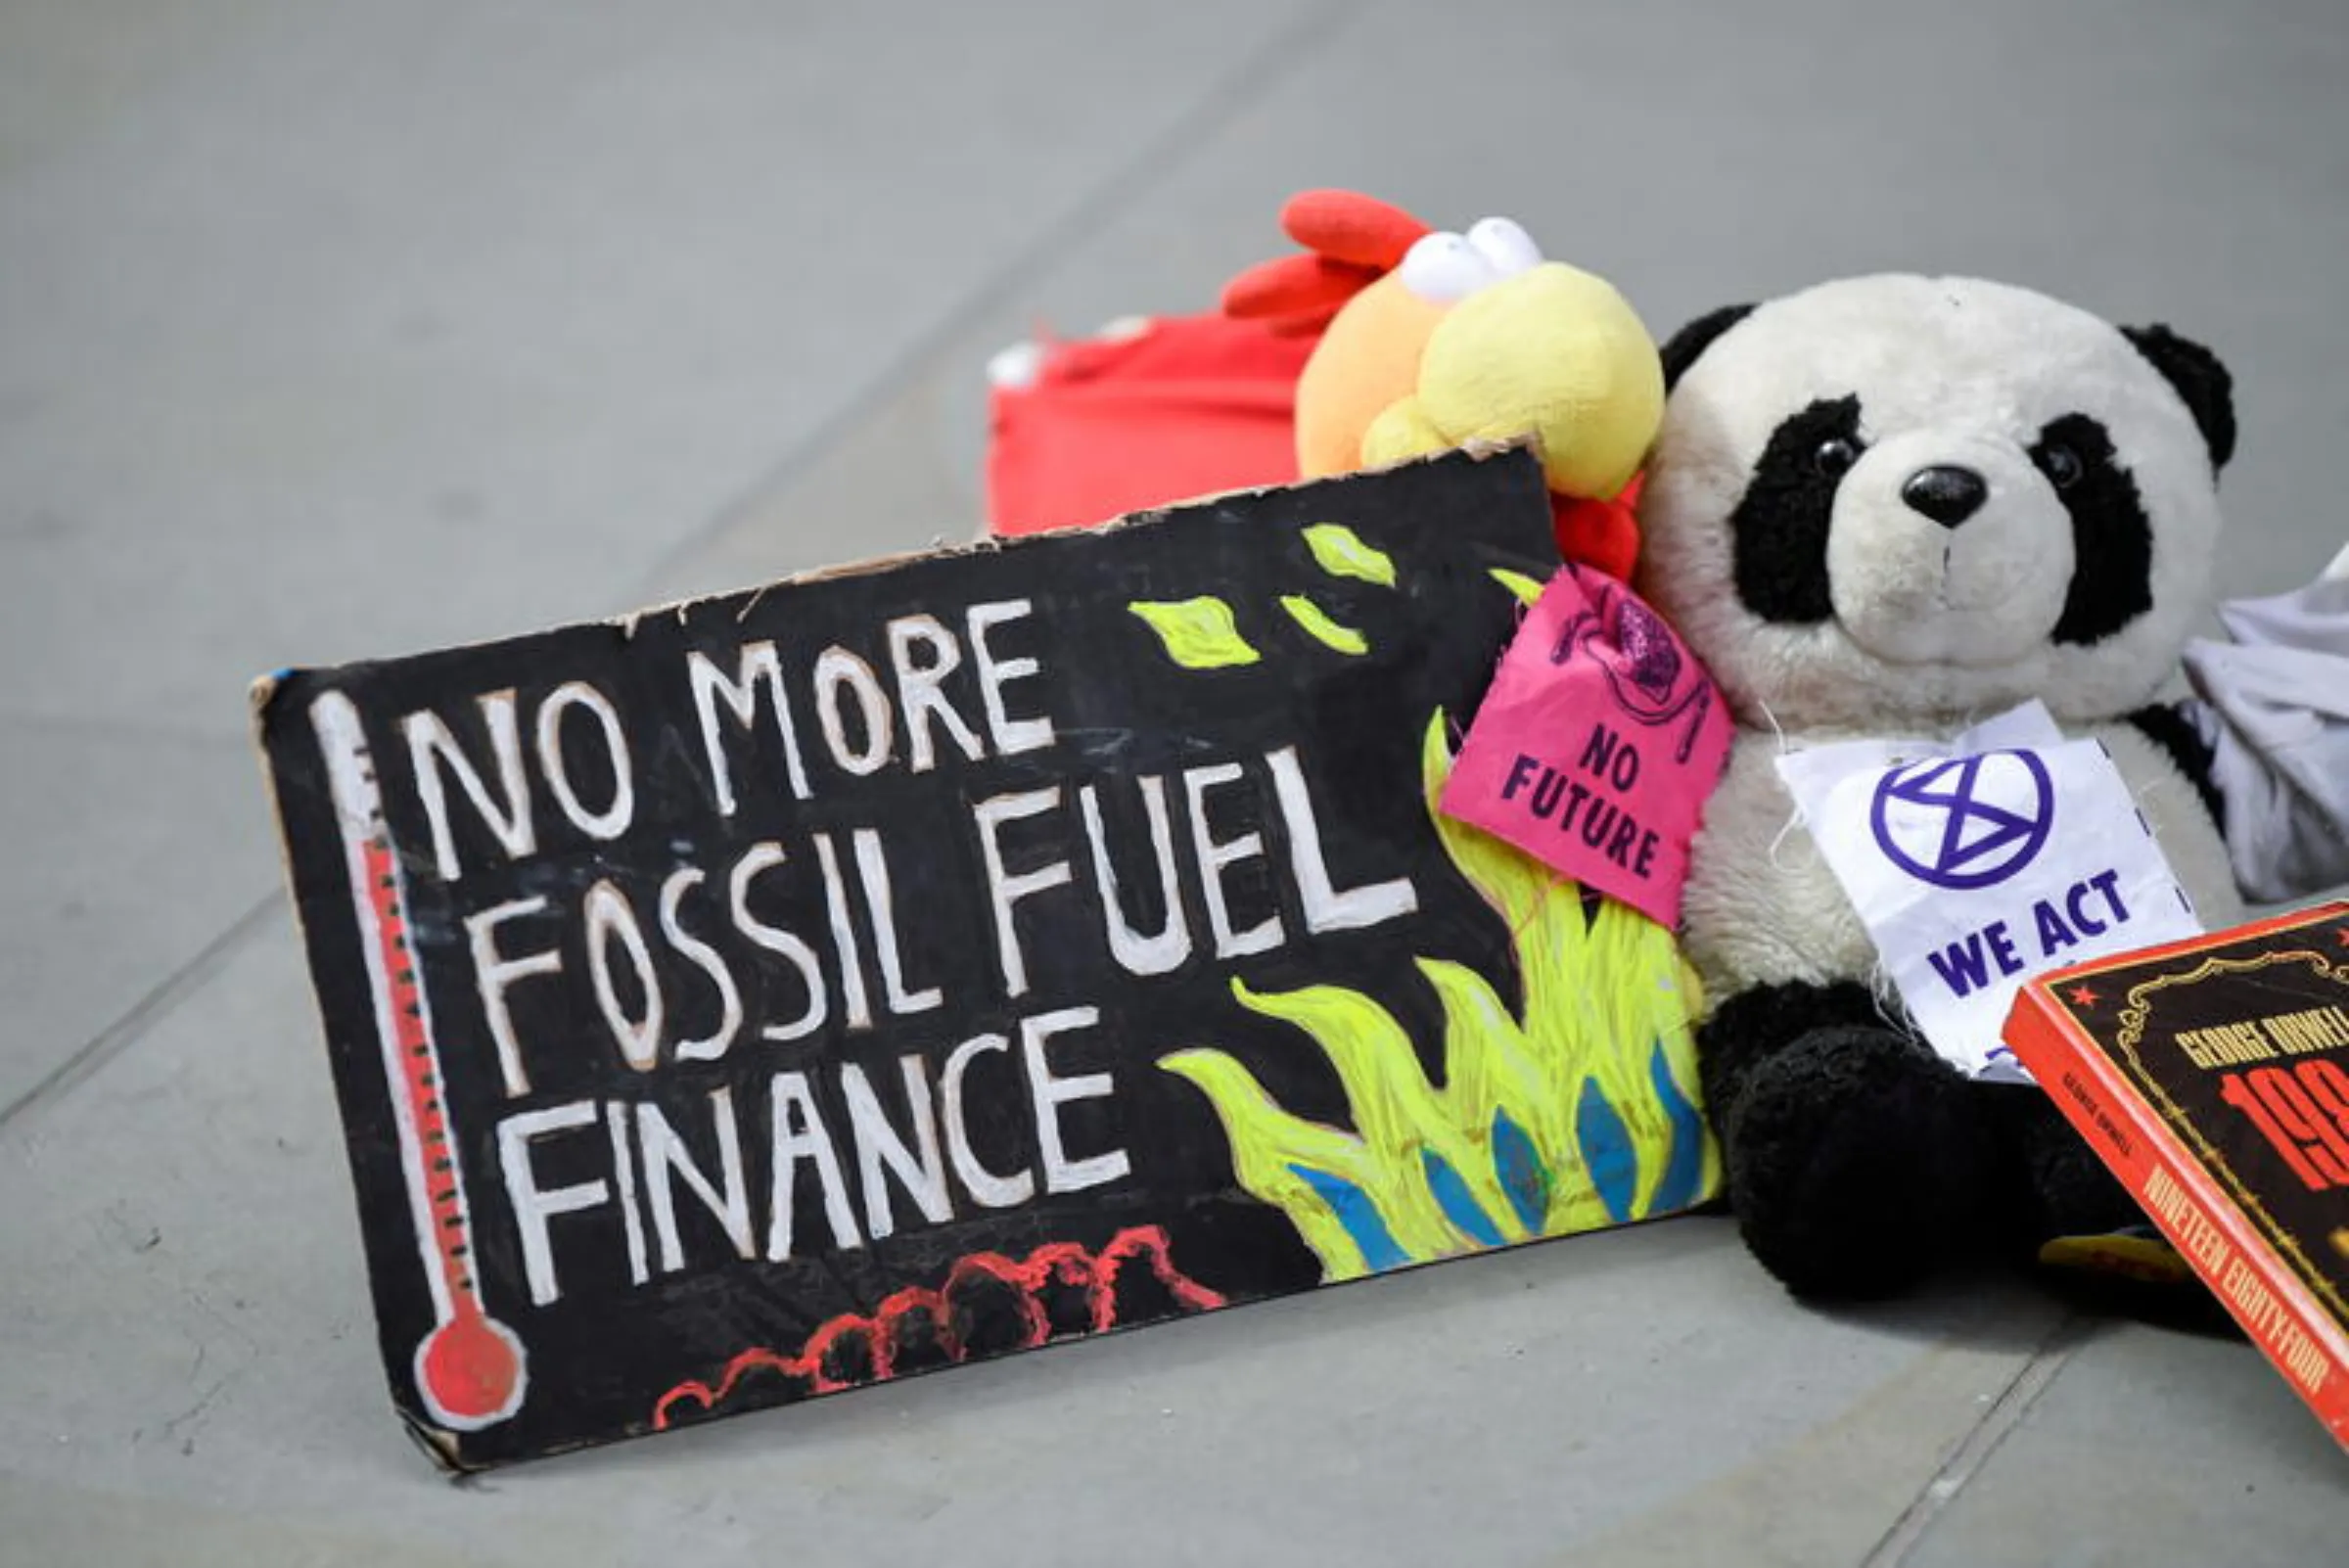 A sign lies on the ground as members of Extinction Rebellion stage a protest against the use of and investment in fossil fuels, on Earth Day in the City of London, Britain, April 22, 2022. REUTERS/Toby Melville